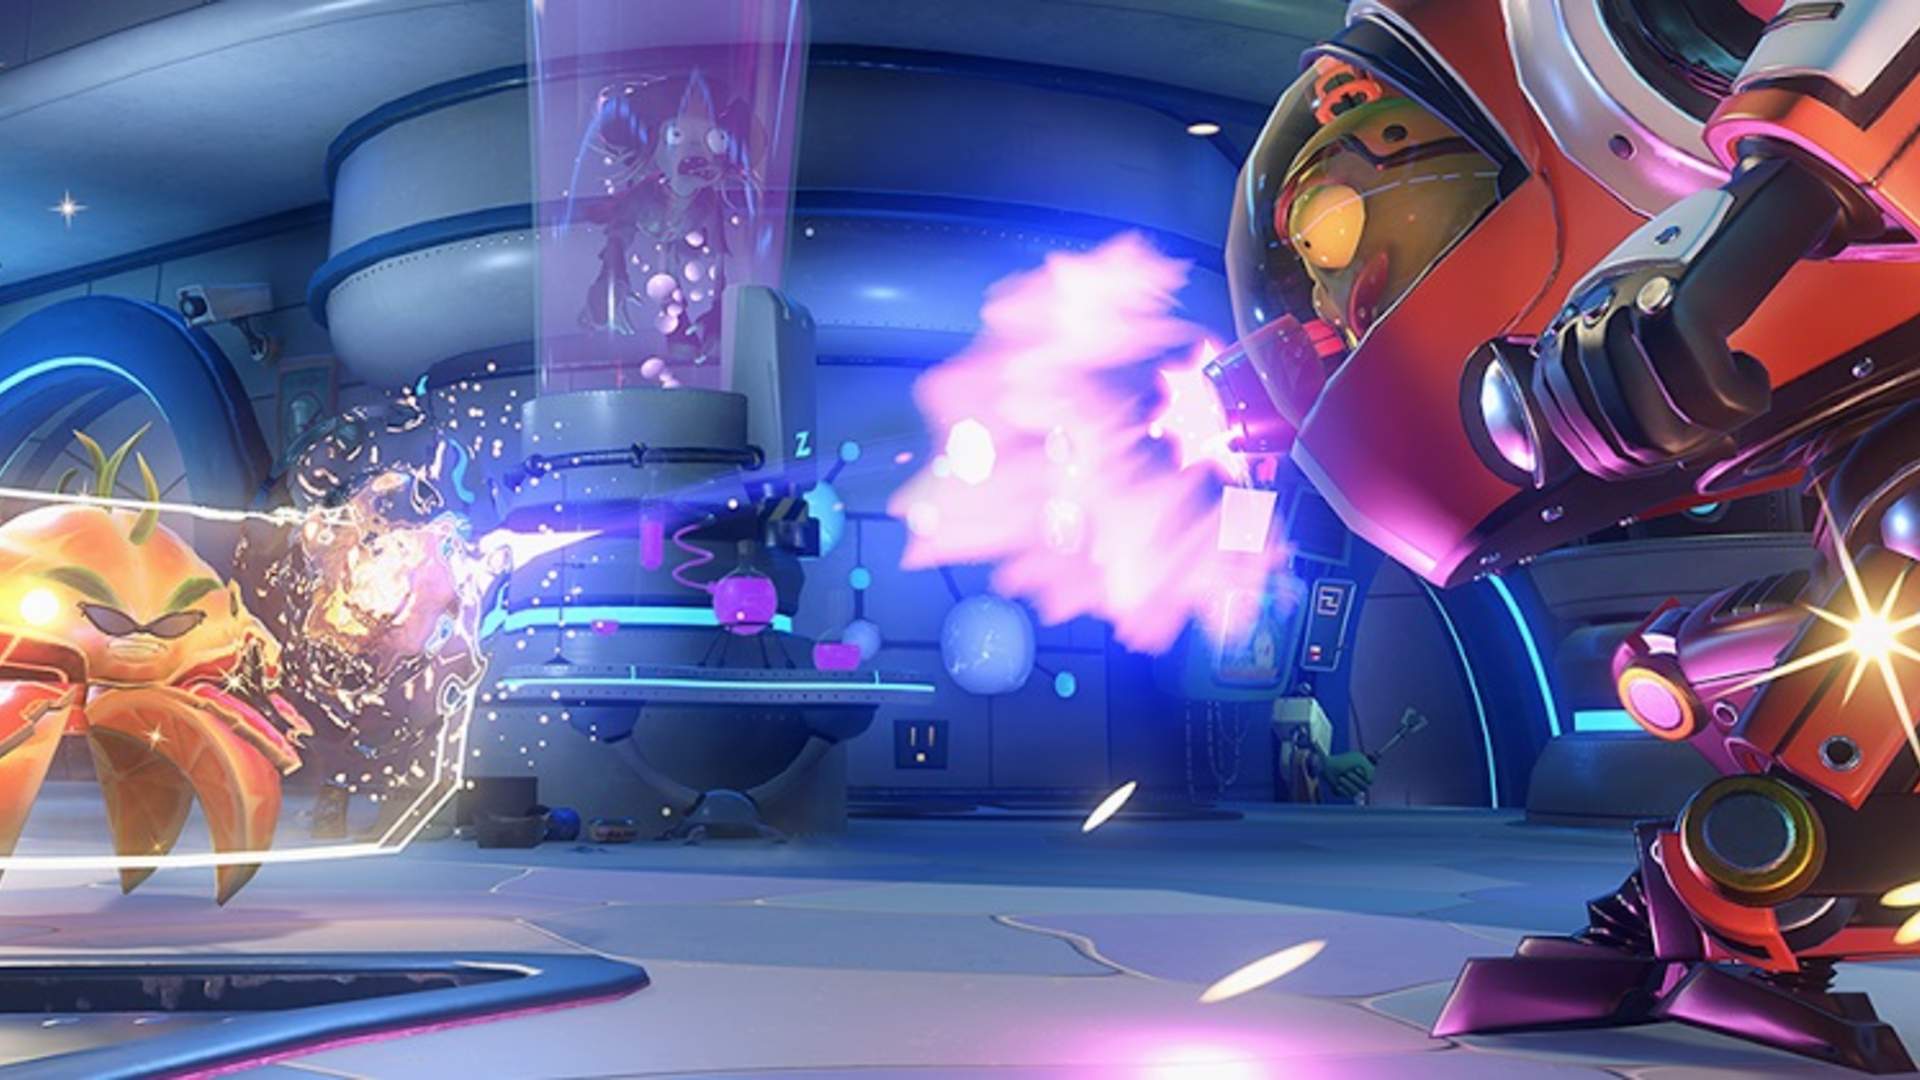 Plants vs Zombies Garden Warfare 2: Earn Coins and Level Up Fast